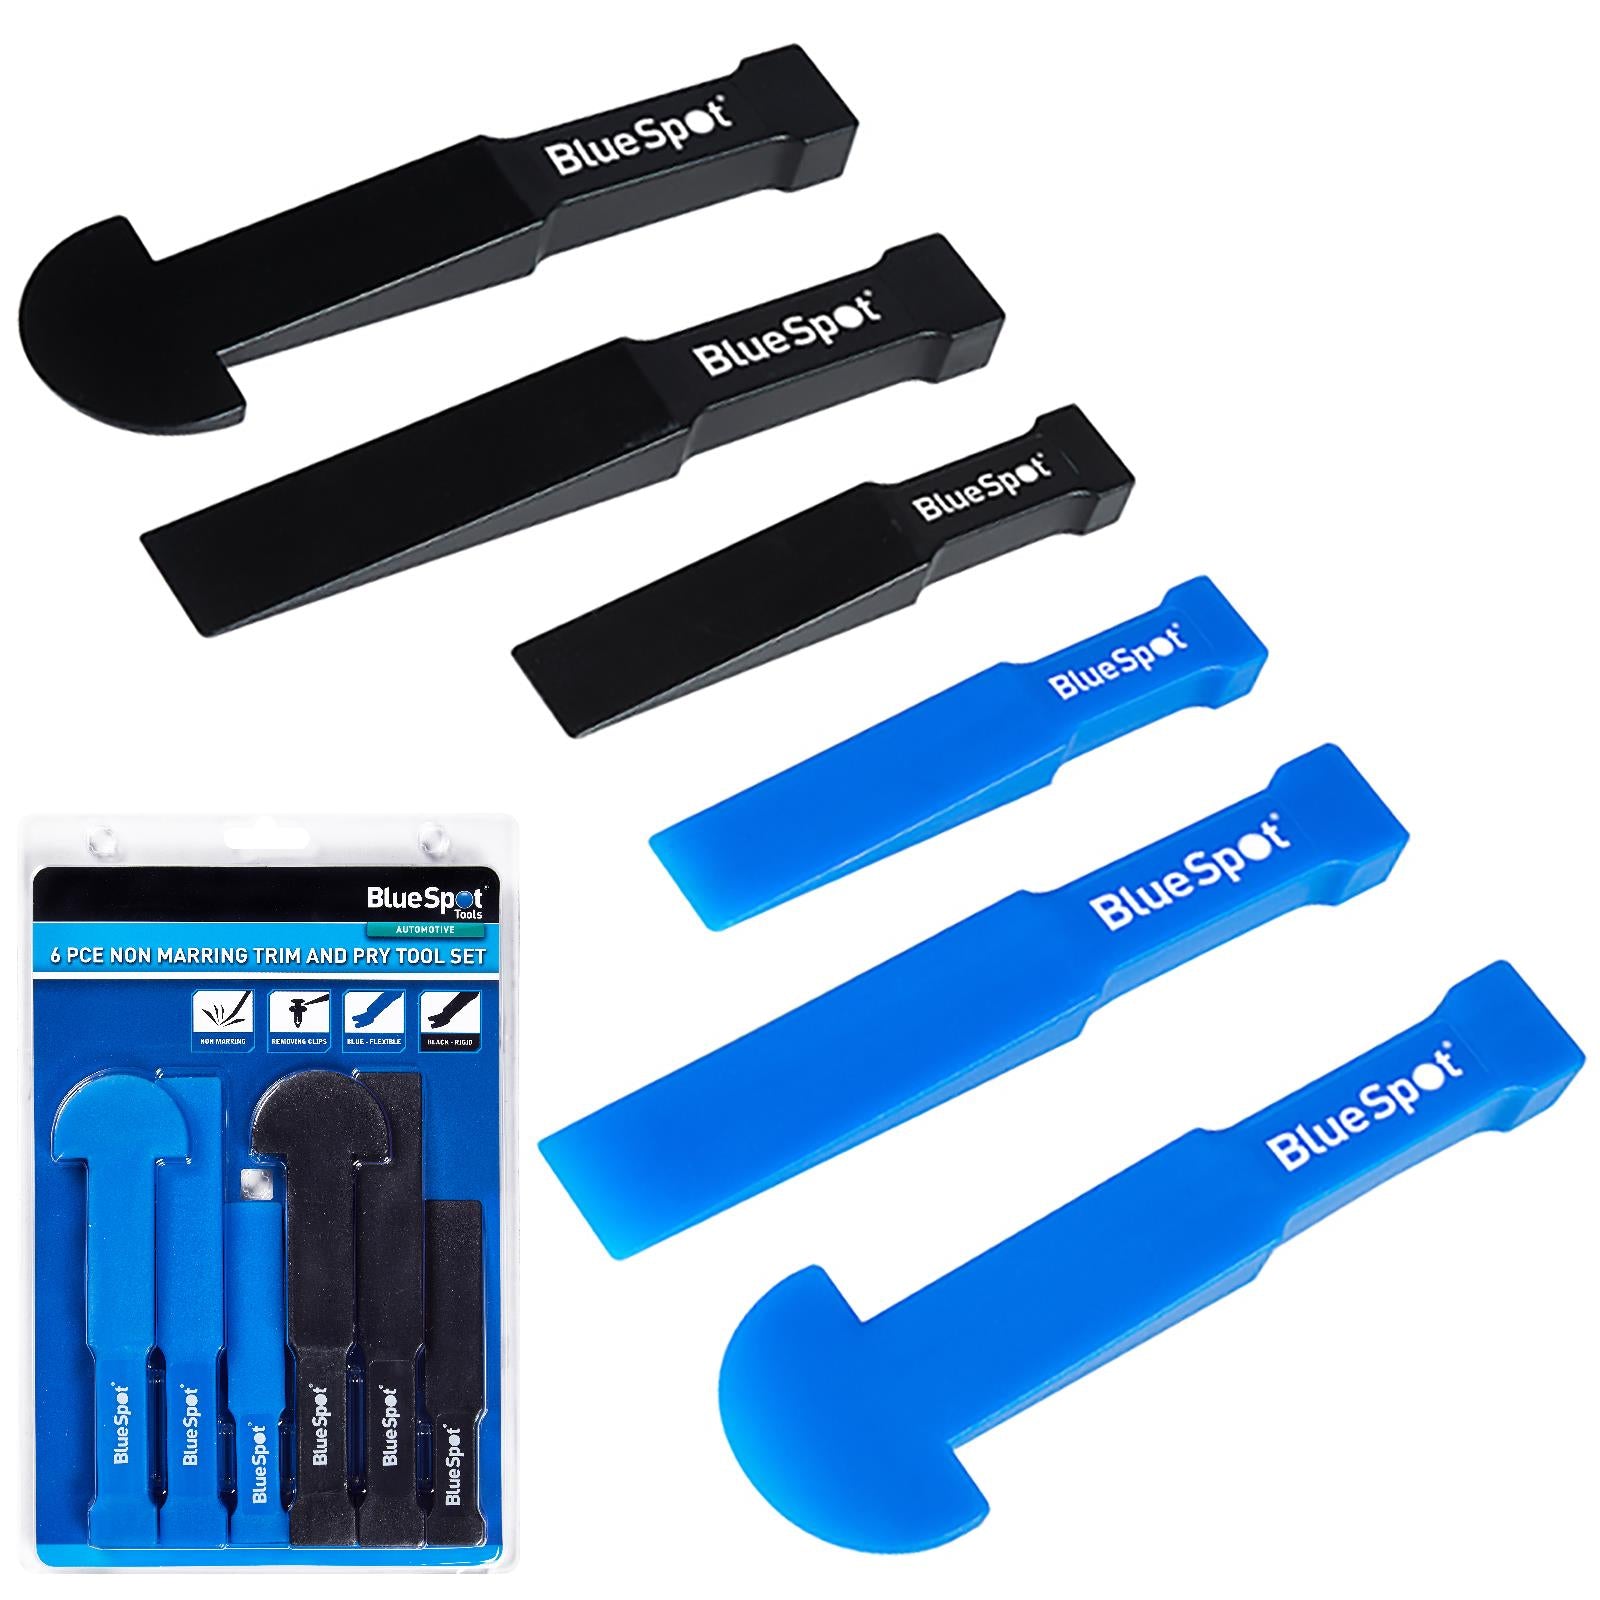 BlueSpot Non Marking Marring Trim And Pry Tool Set 6 Piece